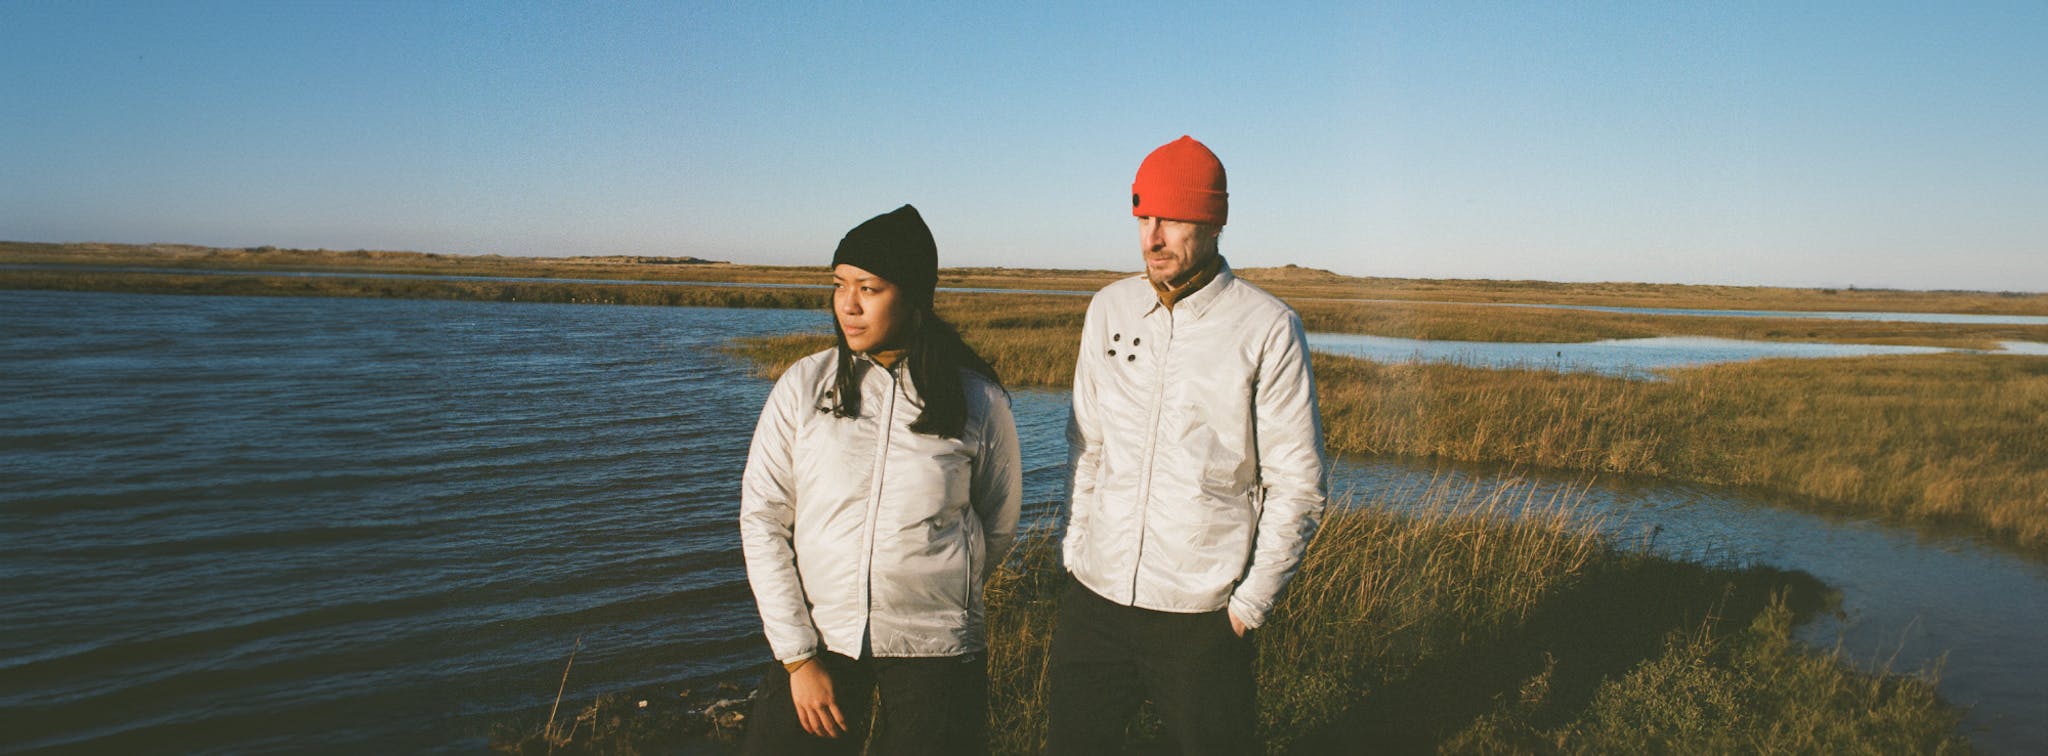 Two individuals in silver jackets and beanies, one black and one red, standing in the late afternoon sun by a marshland.